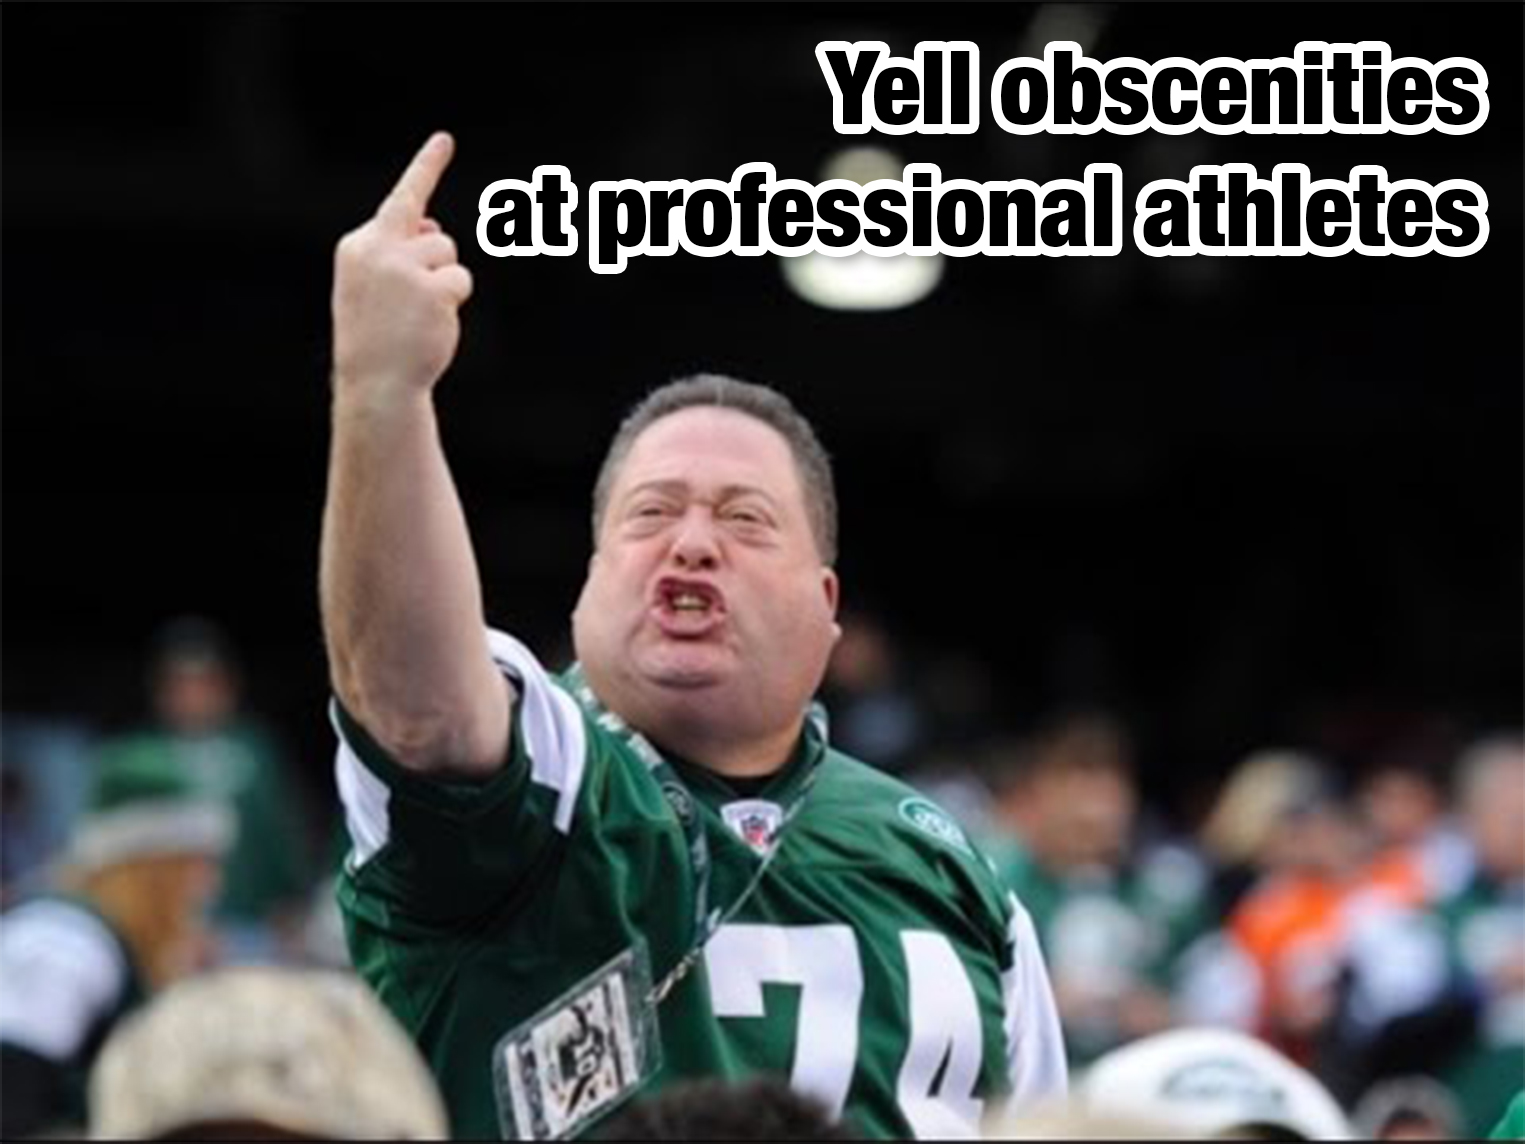 cool pics - Yell obscenities at professional athletes Tor